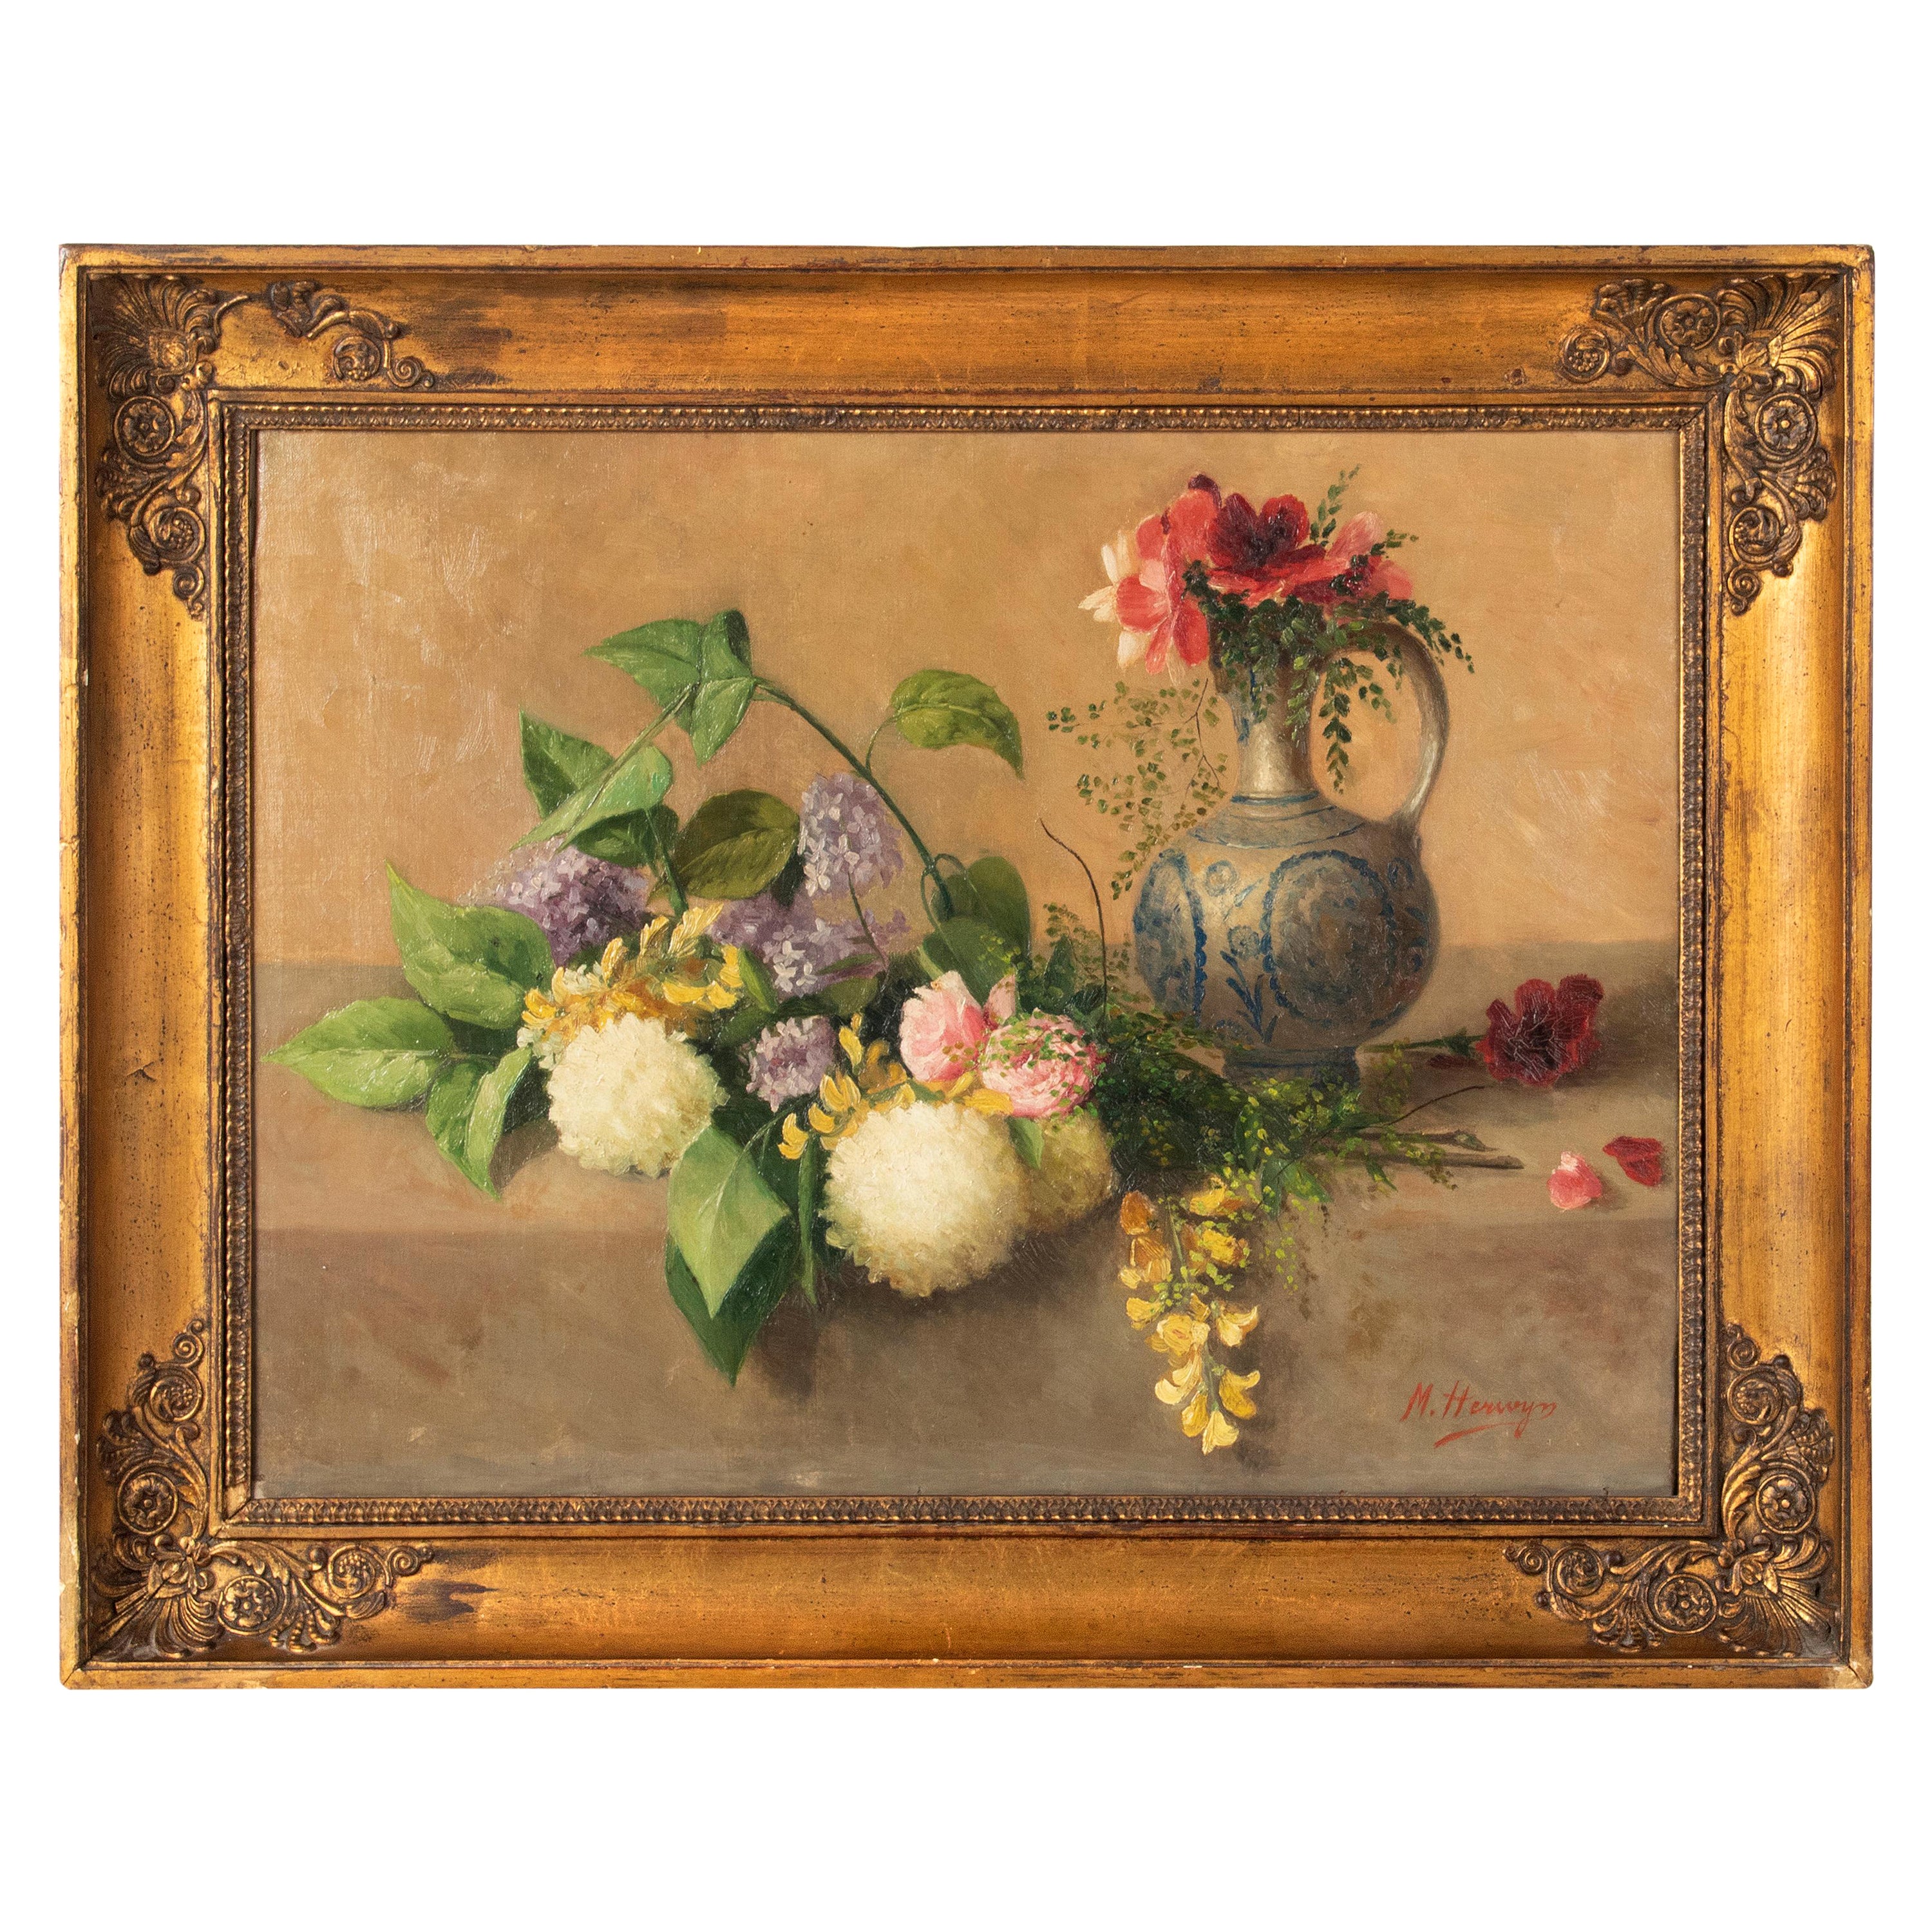 19th Century Flower Still Life Painting Oil on Canvas by M. Herwyn